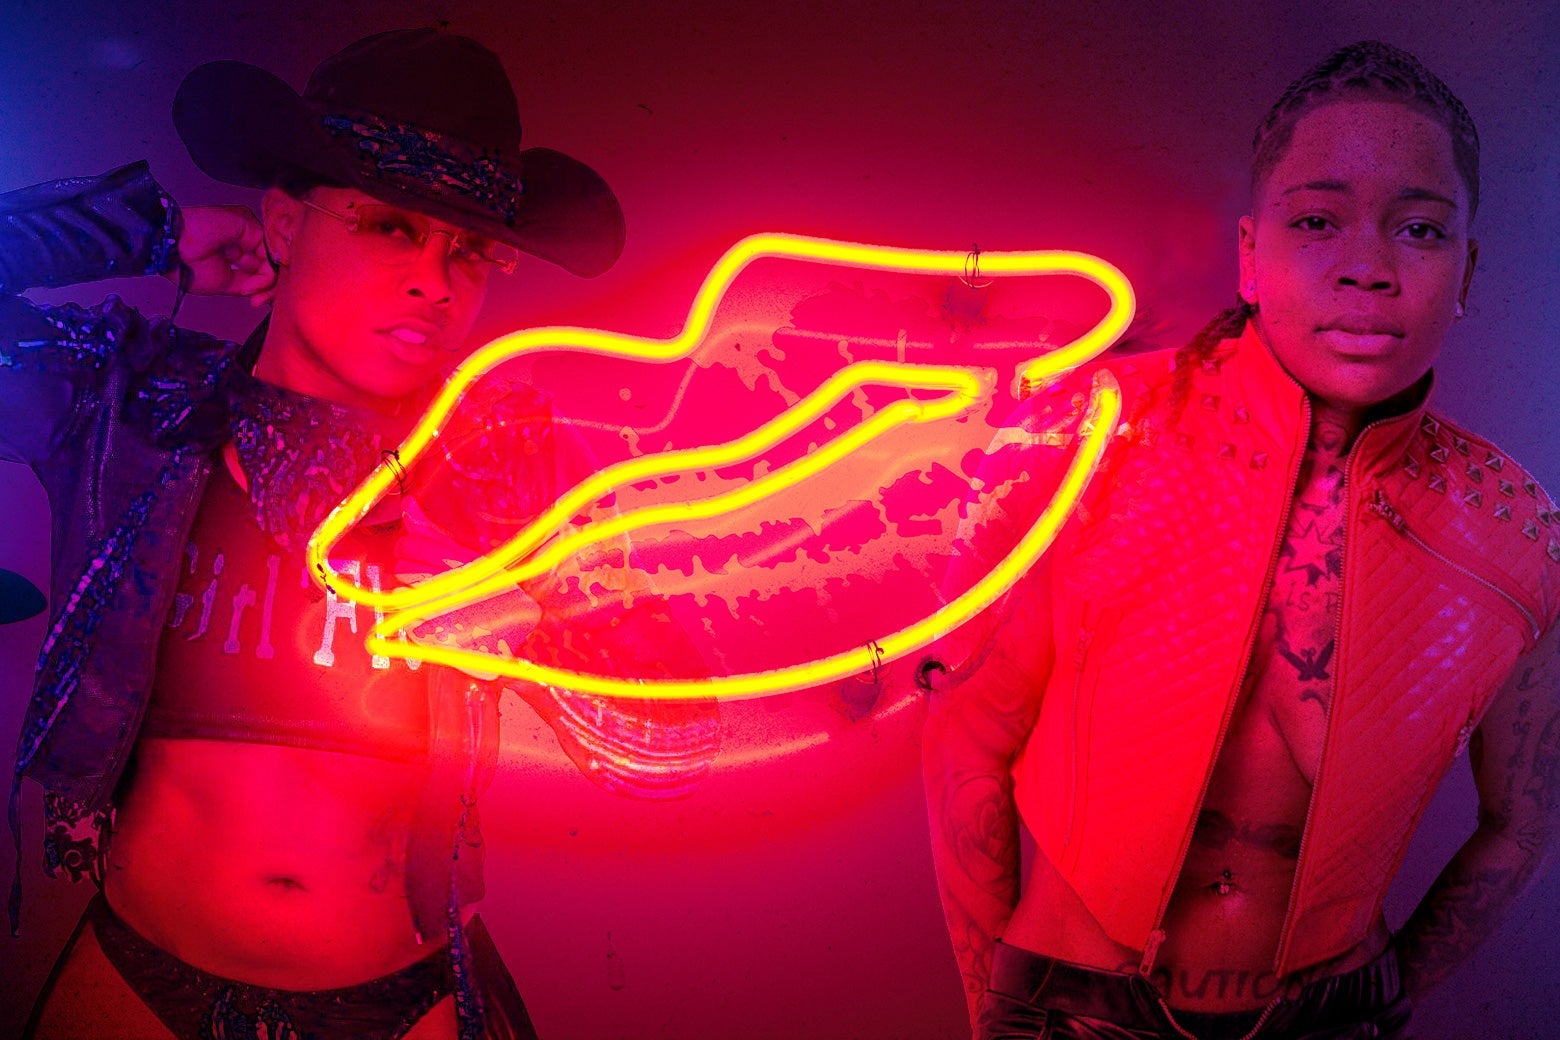 Dom lesbian strippers How performers like Girl Flexxx and Kaution are changing the game.